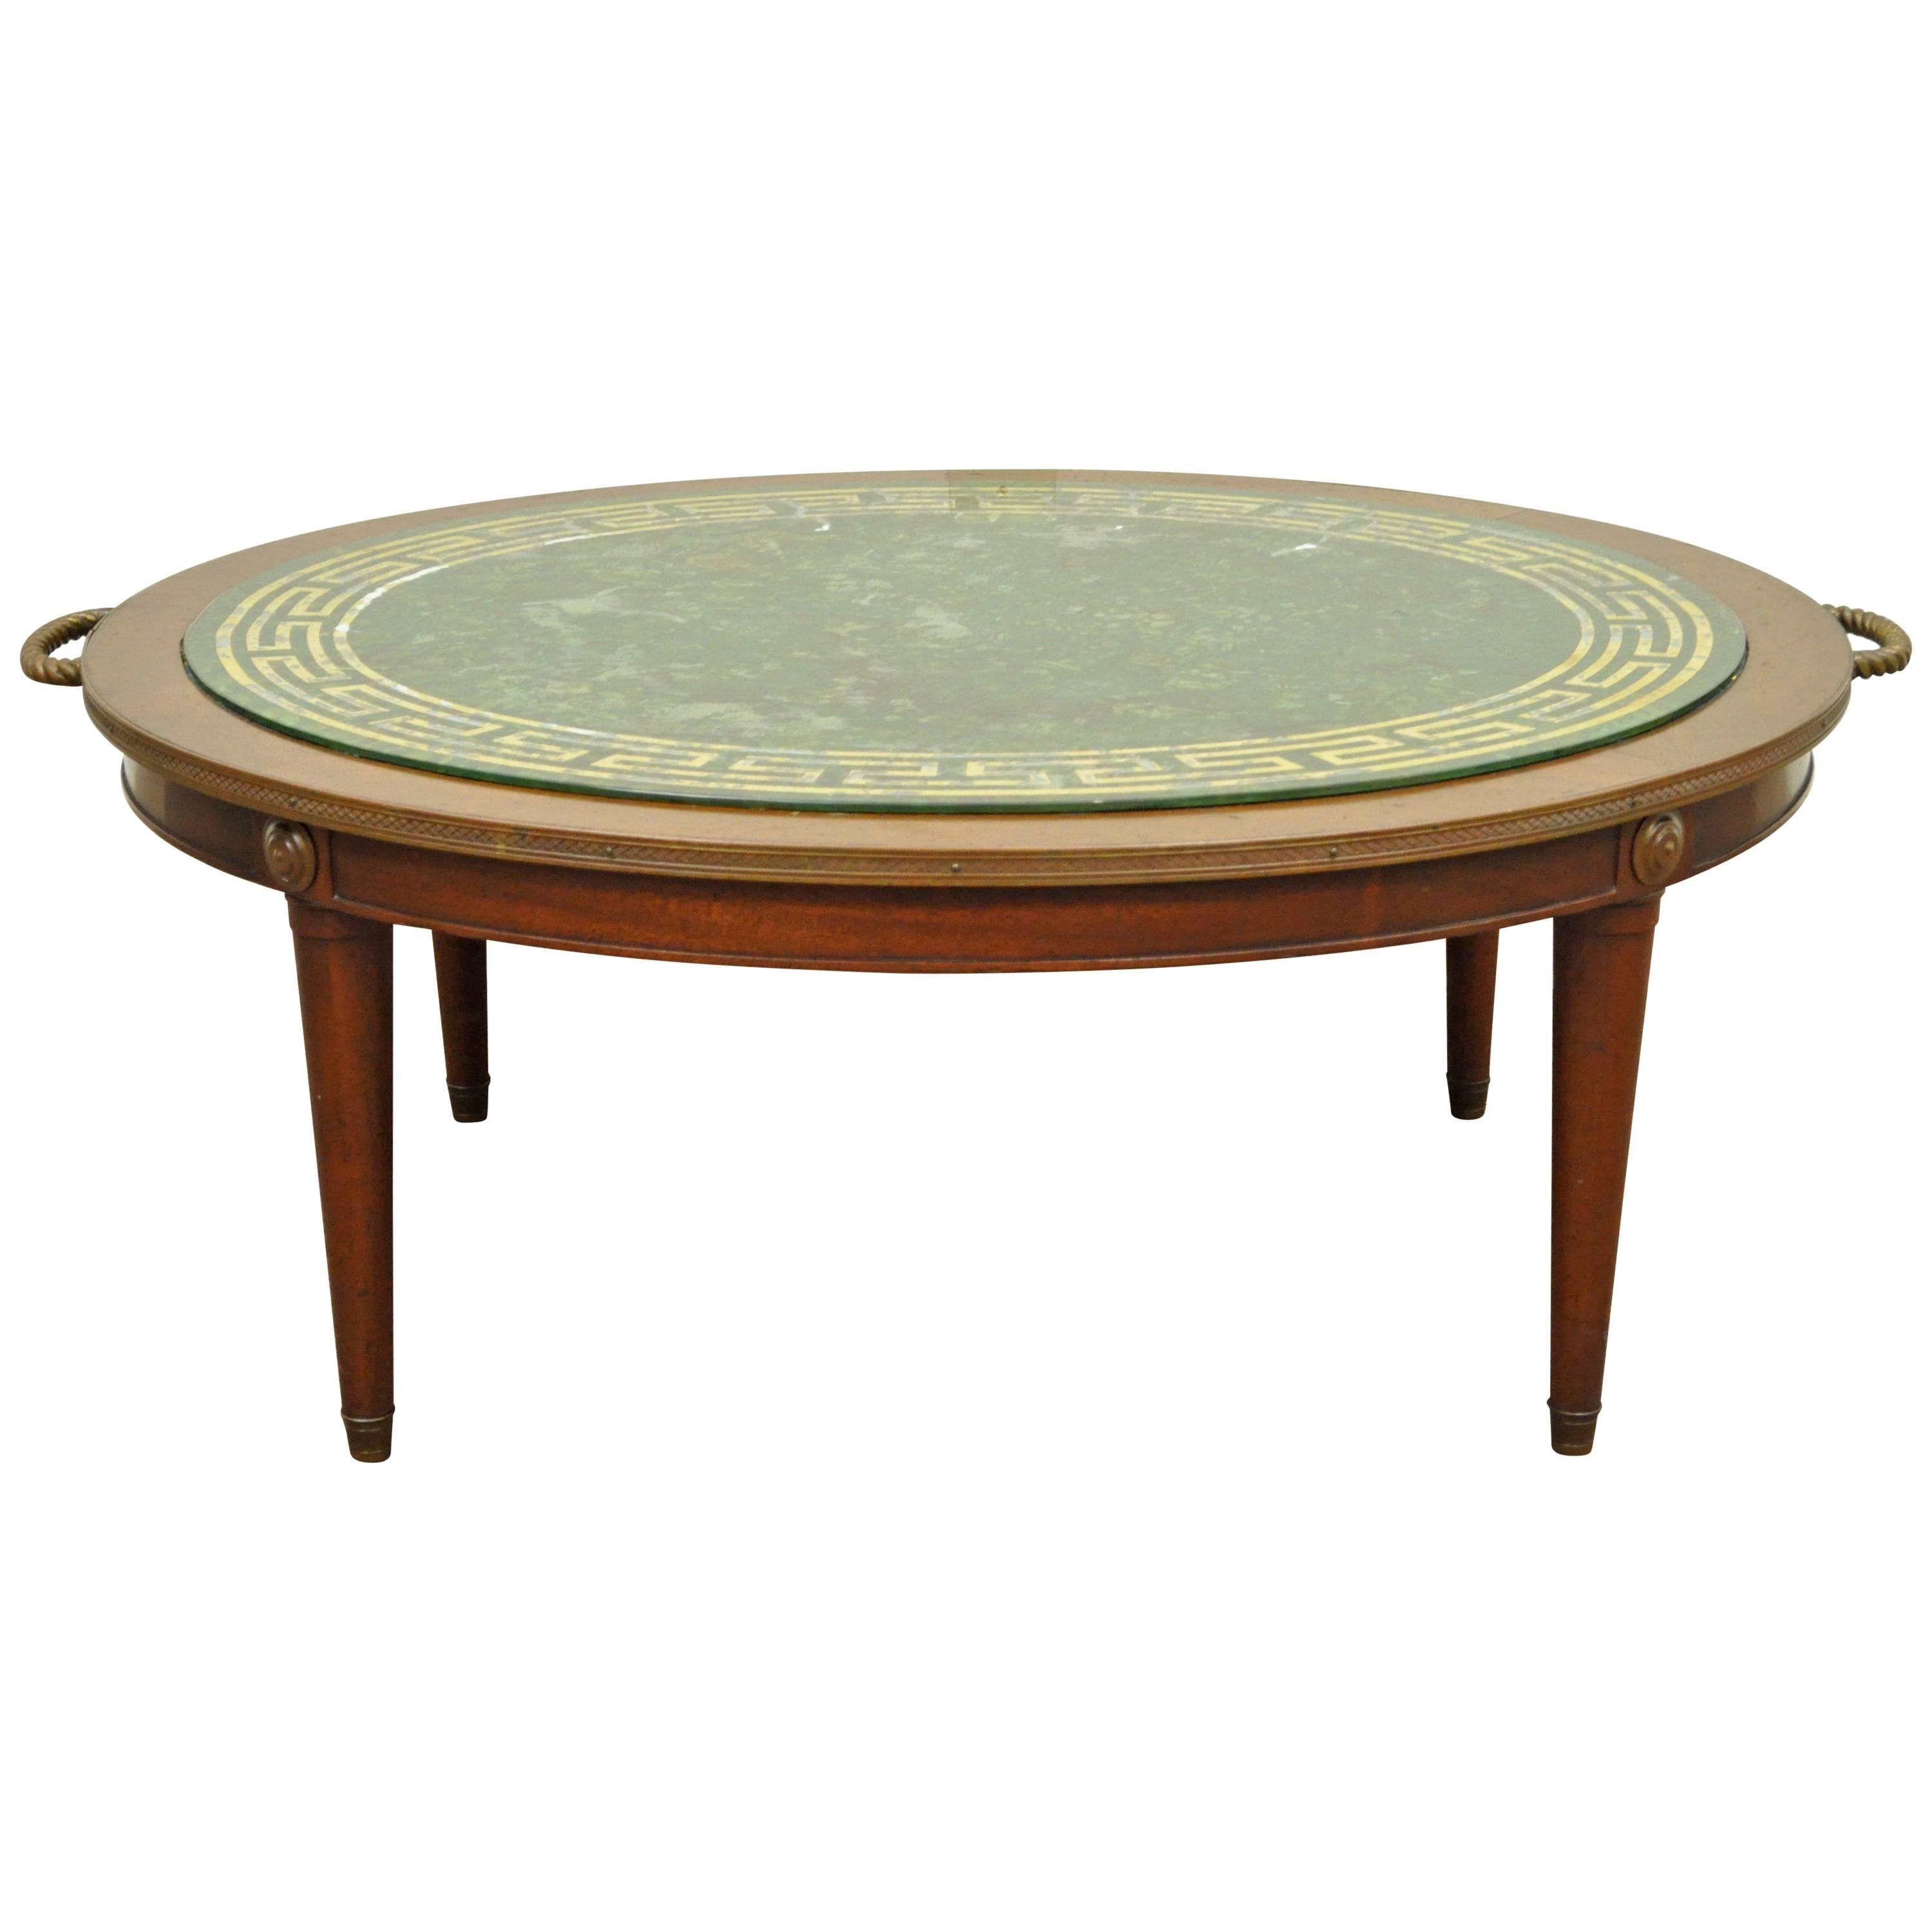 Vintage Greek Key Reverse Decorated Glass and Mahogany Coffee Table For Sale